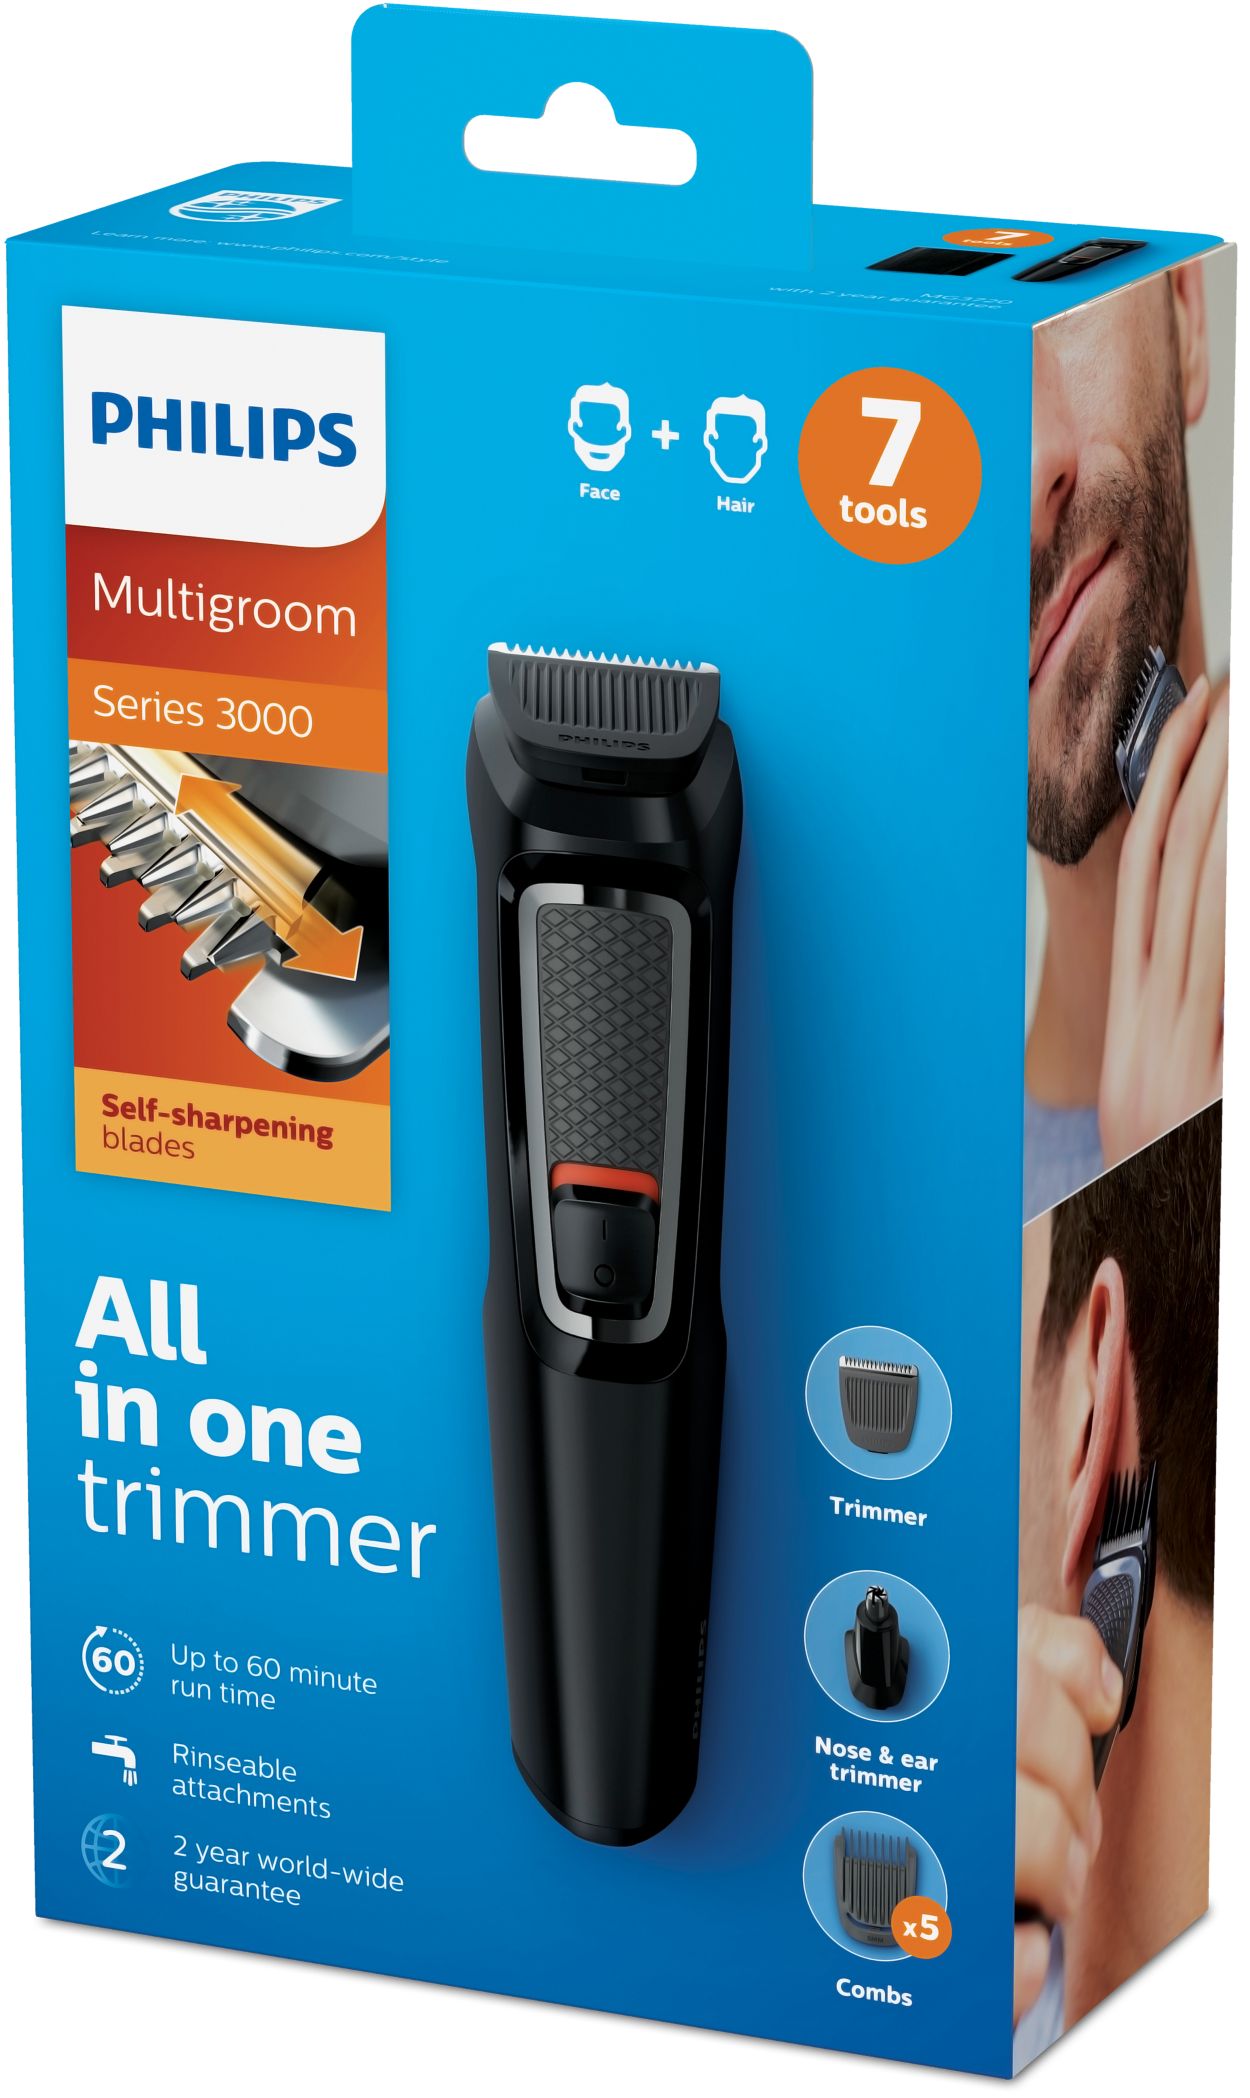 Face Multigroom Hair series 3000 Philips 7-in-1, MG3720/13 | and